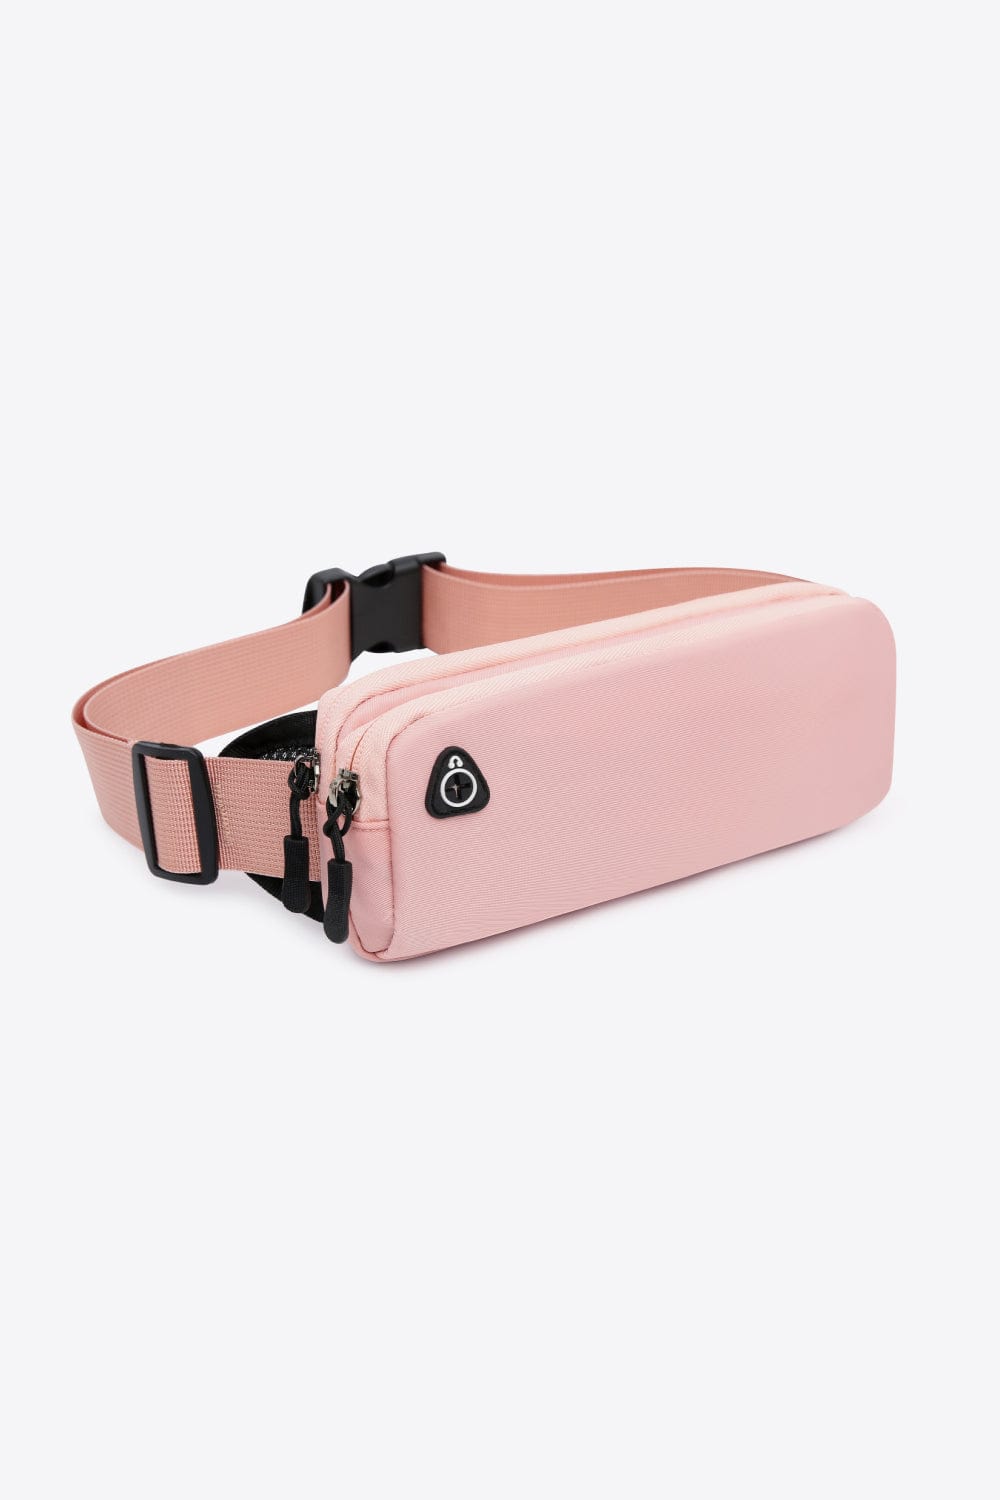 The802Gypsy Handbags, Wallets & Cases Blush Pink / One Size GYPSY-Mini Sling Bag